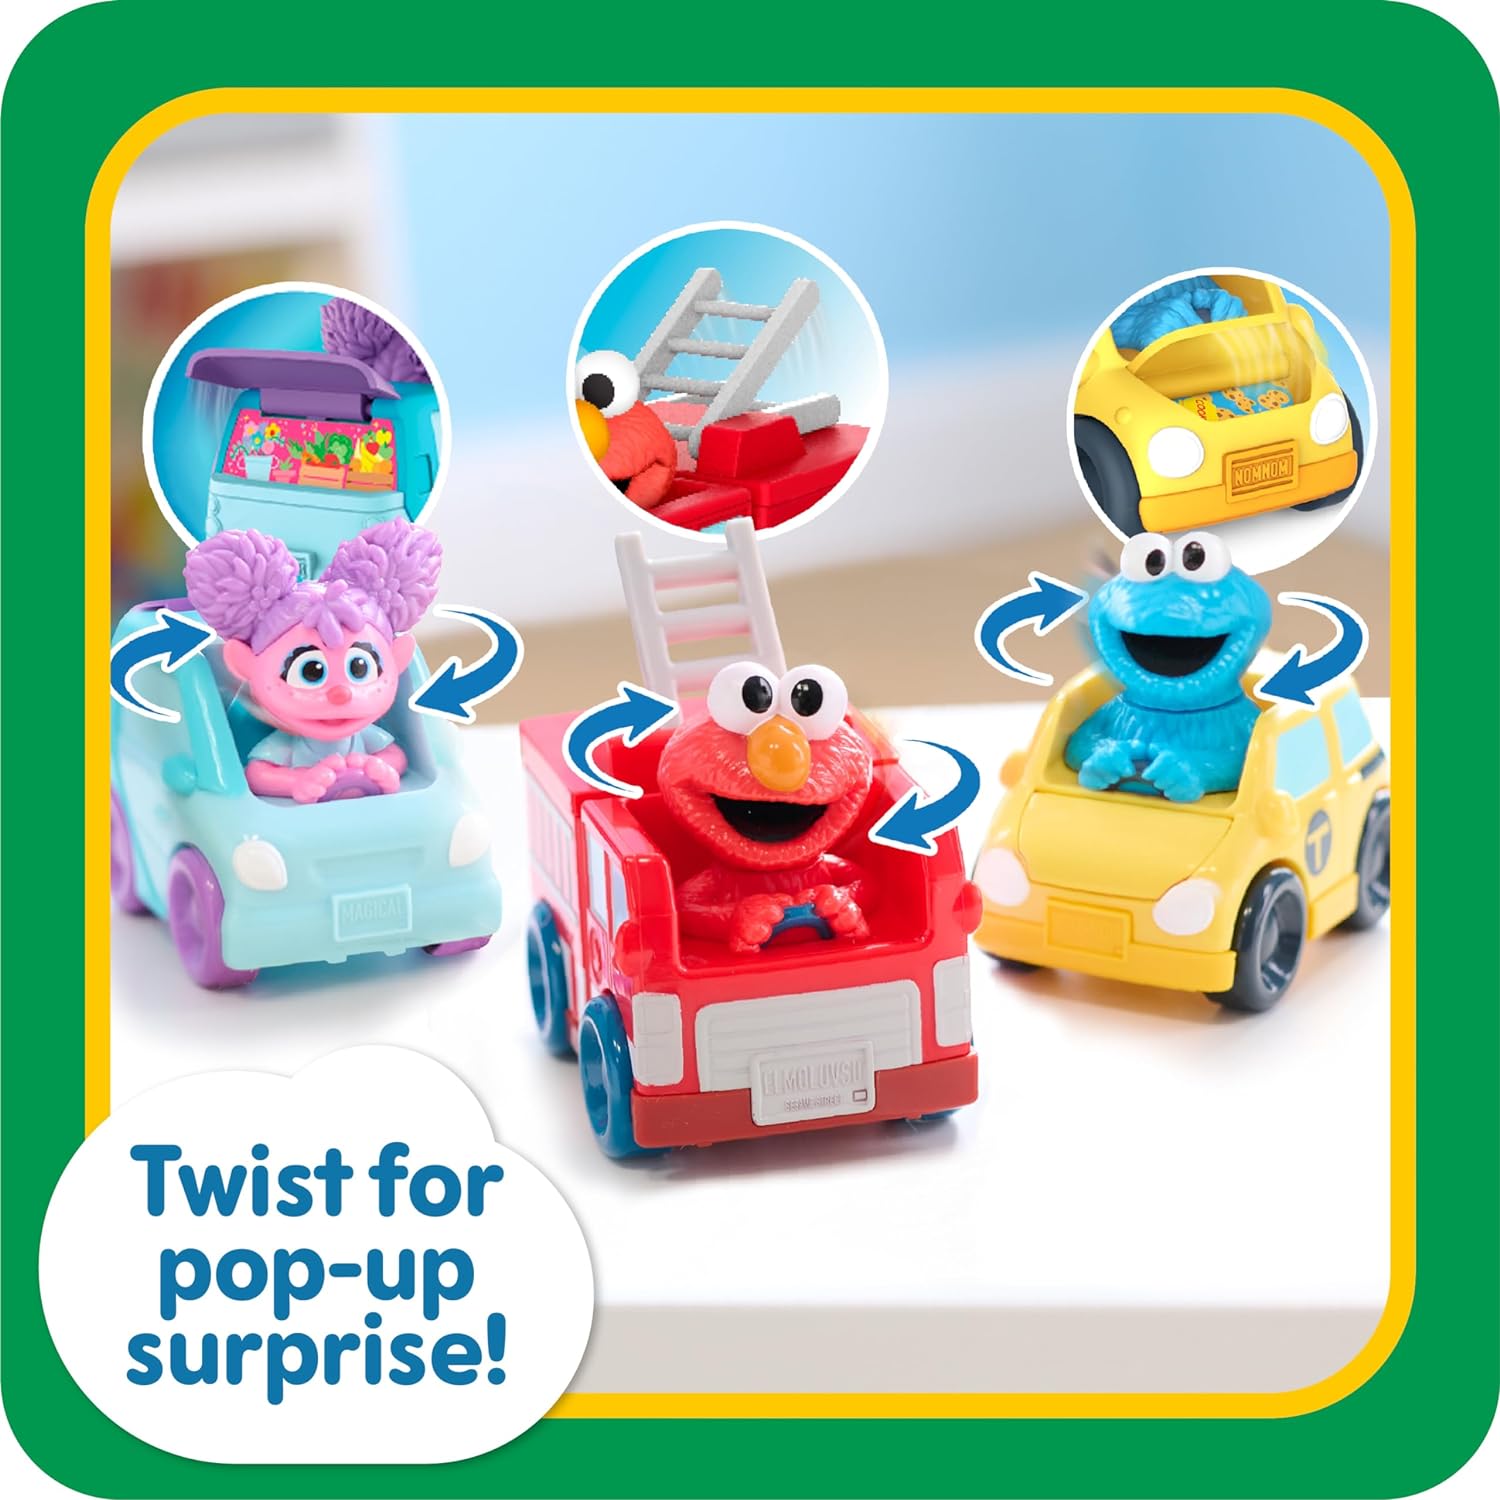 Just Play Sesame Street Twist and Pop Wheelies 3-Pack Preschool Toy Vehicles, Kids Toys for Ages 2 Up